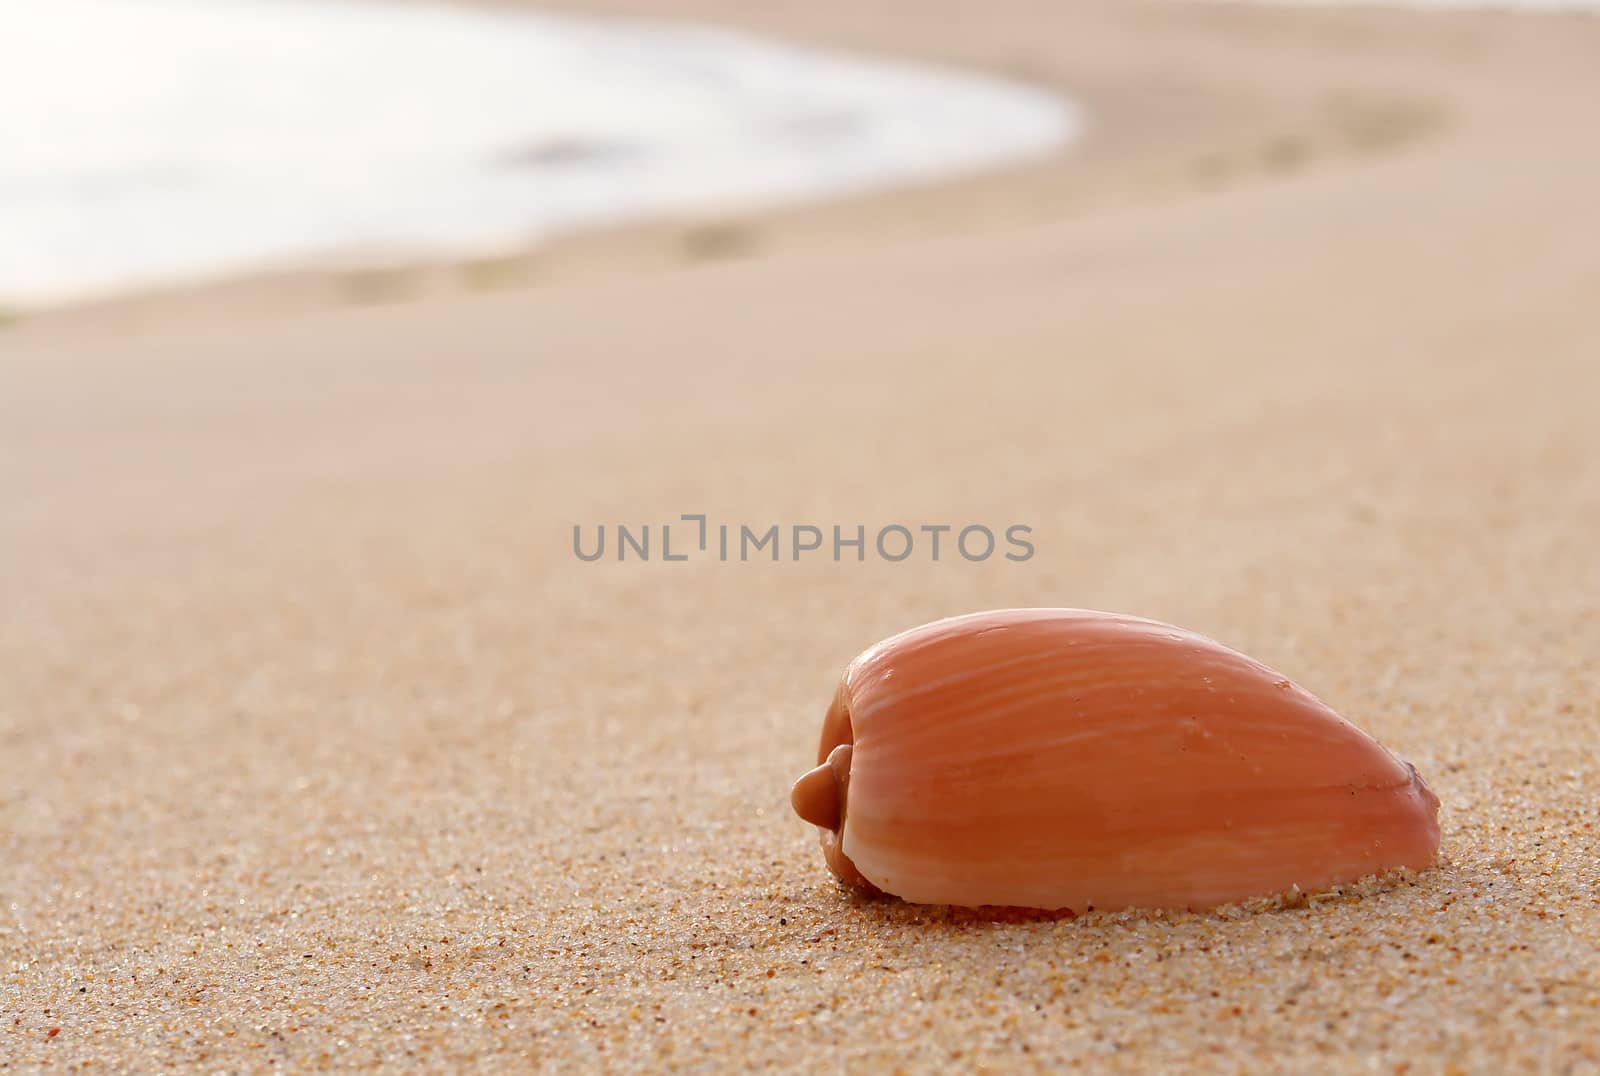 Sea shell detail in beach sand background                                                 